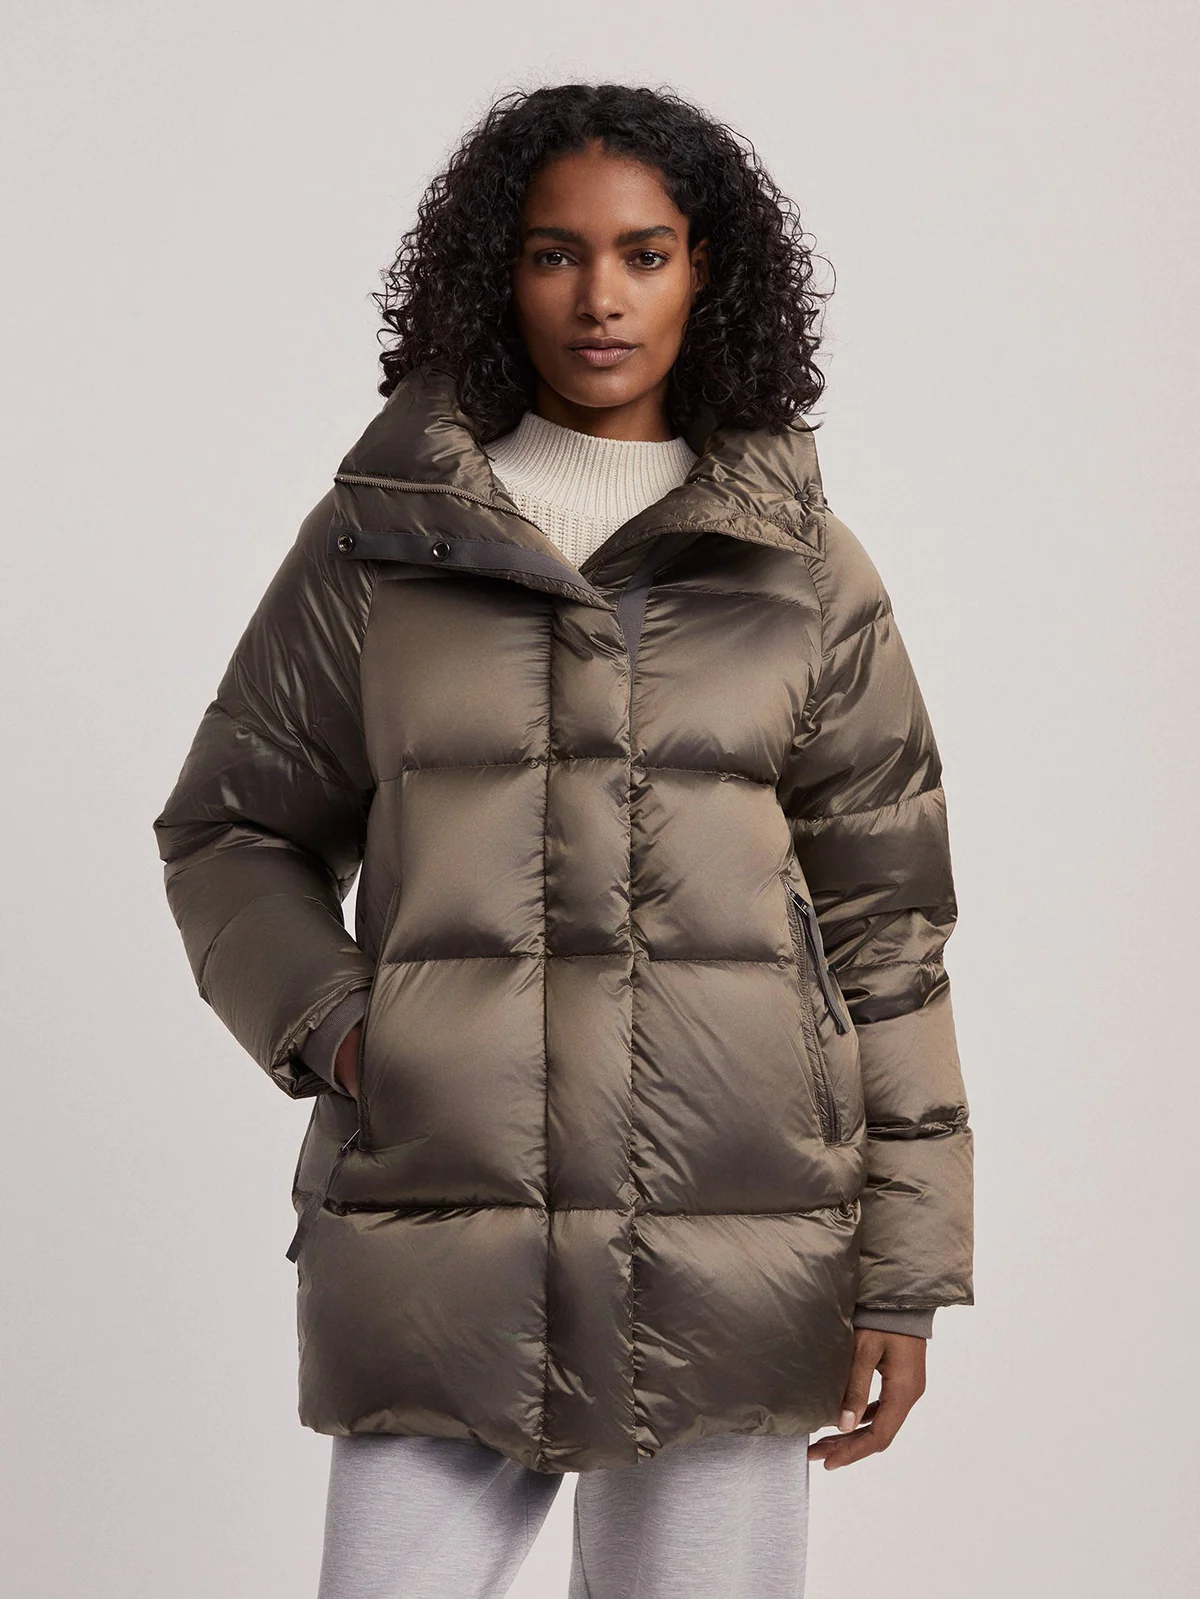 Varley Canton Down Jacket - Brushed Olive Metallic Clothing - Outerwear - Coats by Varley | Grace the Boutique